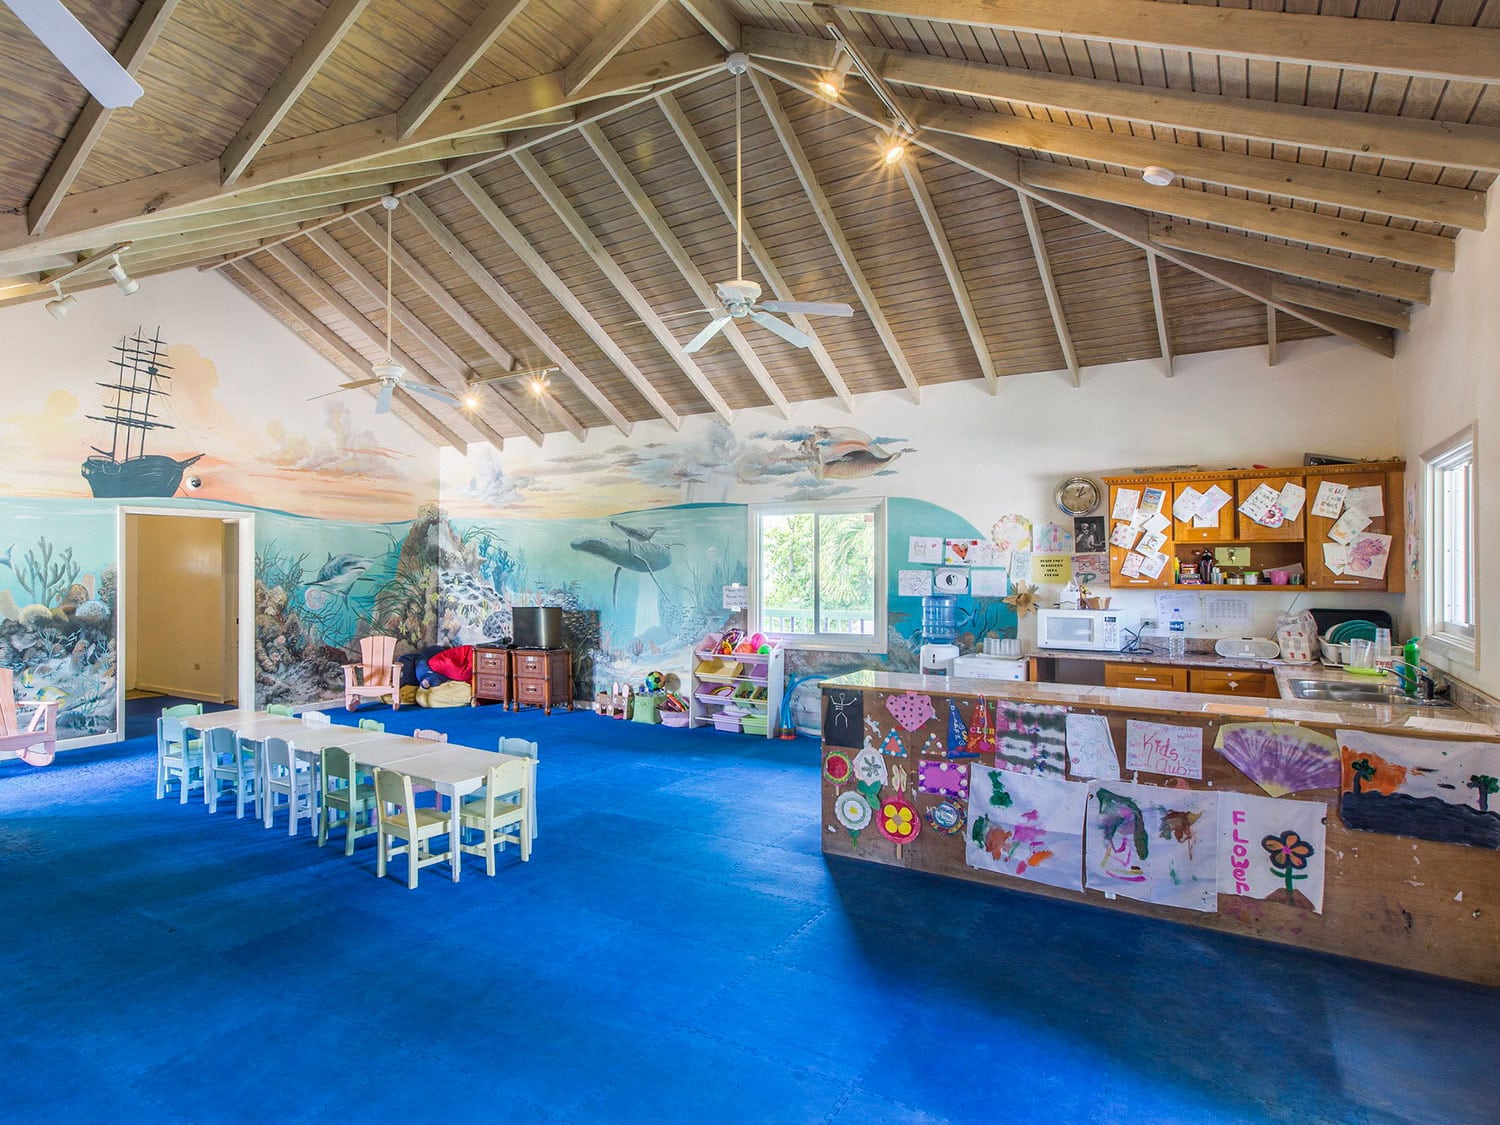 The Kids Club at Verandah Resort and Spa hosts all ages for a variety of activities that will not only entertain them but teach them about Antigua as well.